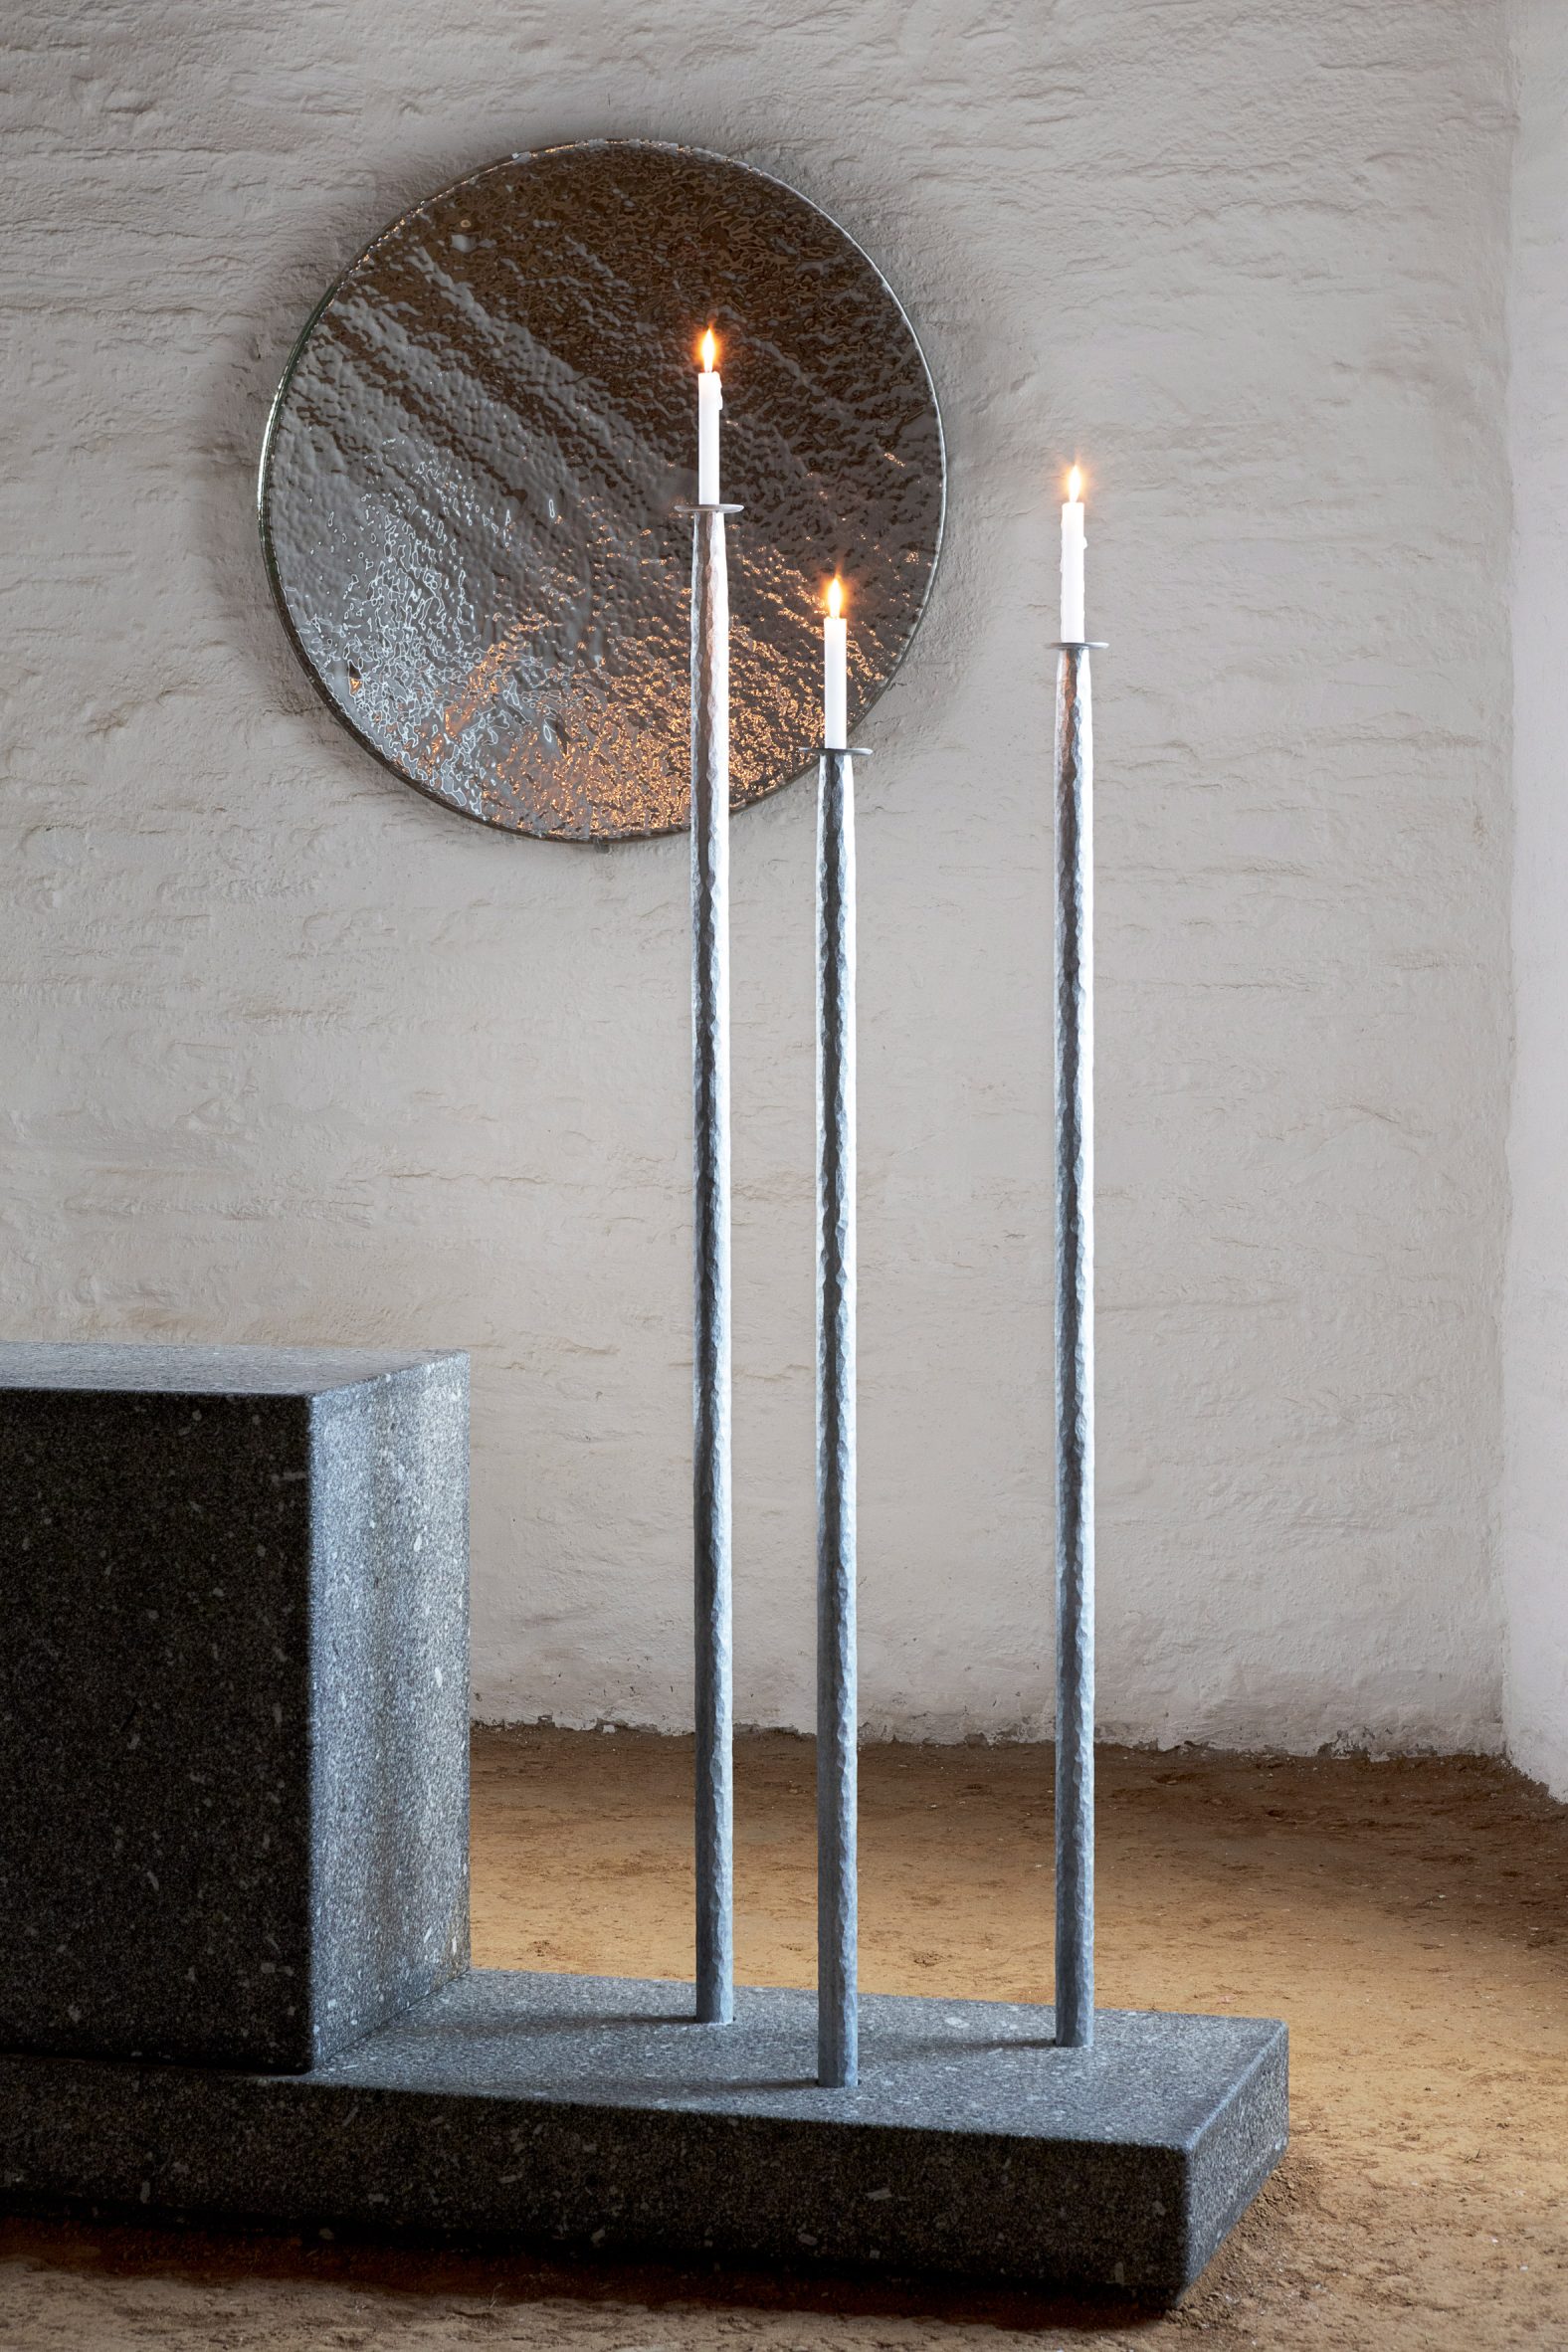 Steel candle holders inside chapel interior by Ronan Bouroullec